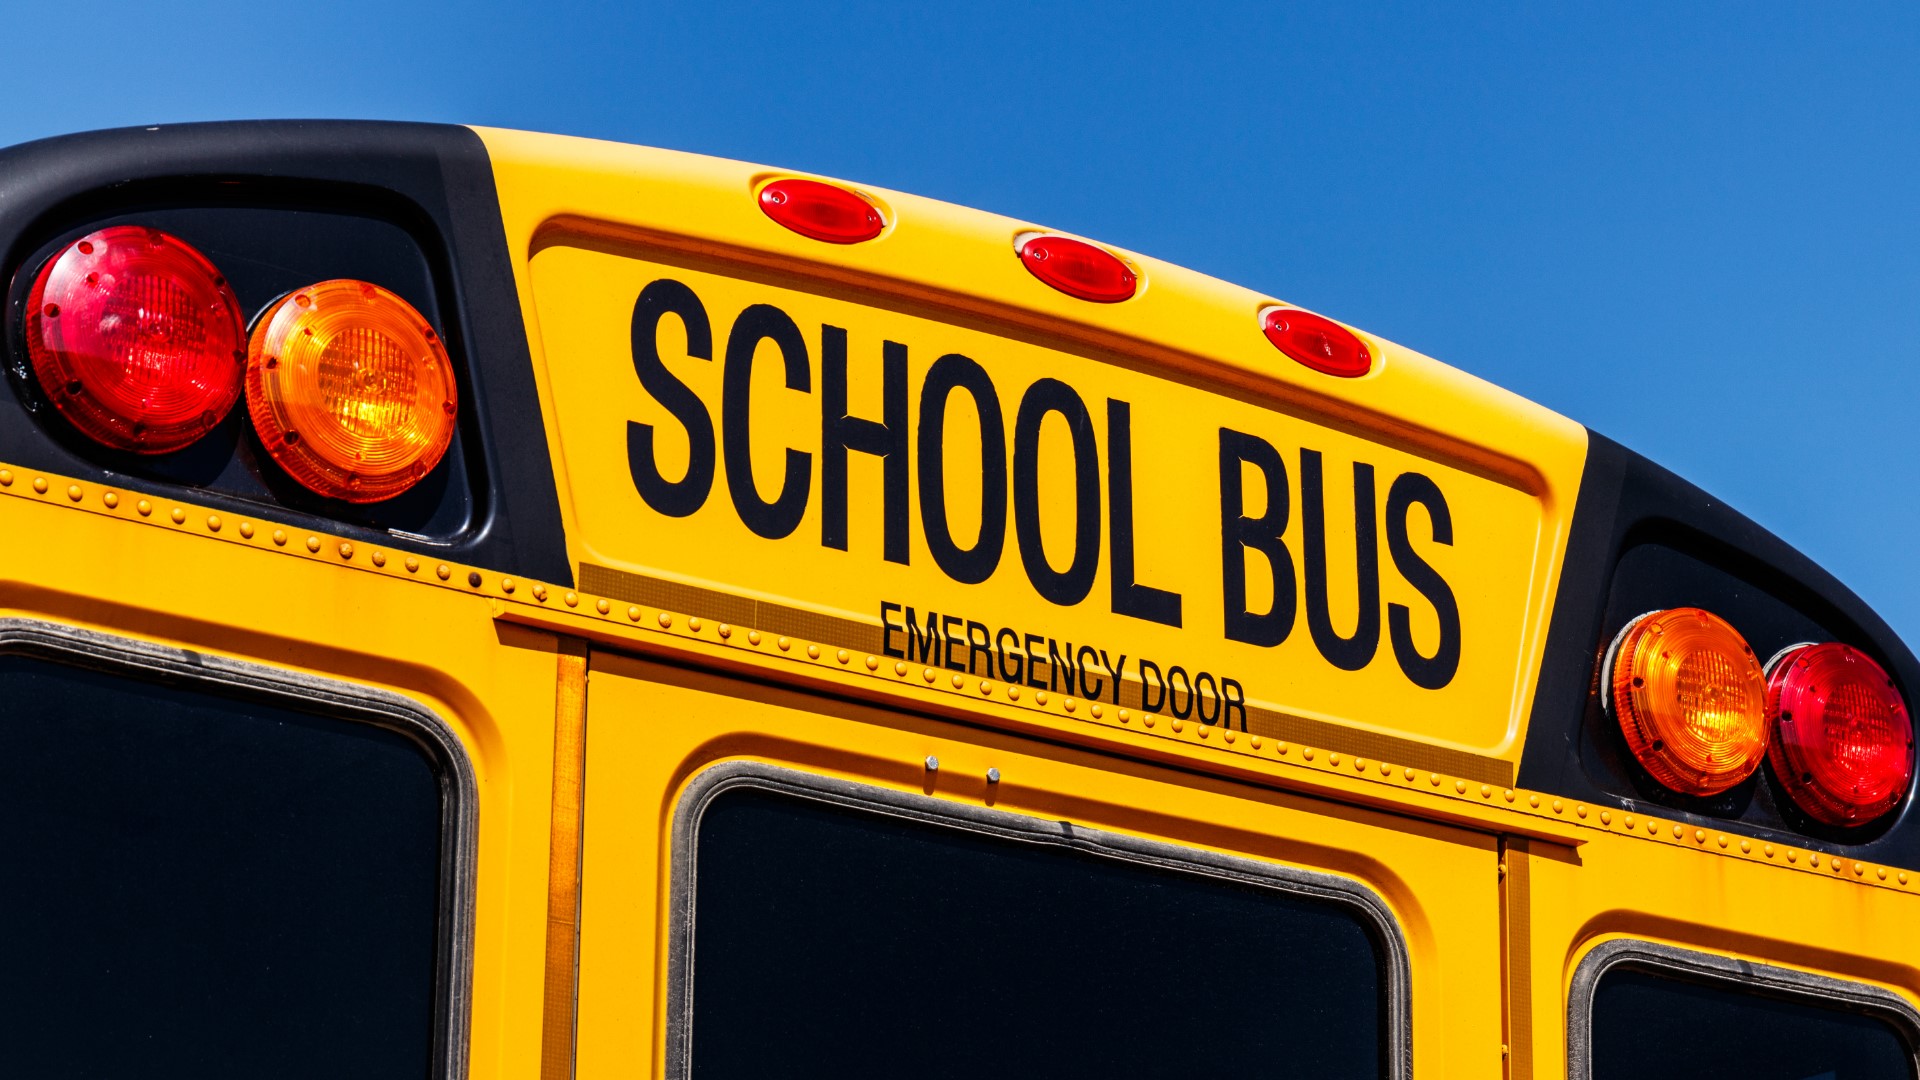 A number of kids are headed back to school and GRPS is offering a set of bus safety tips.